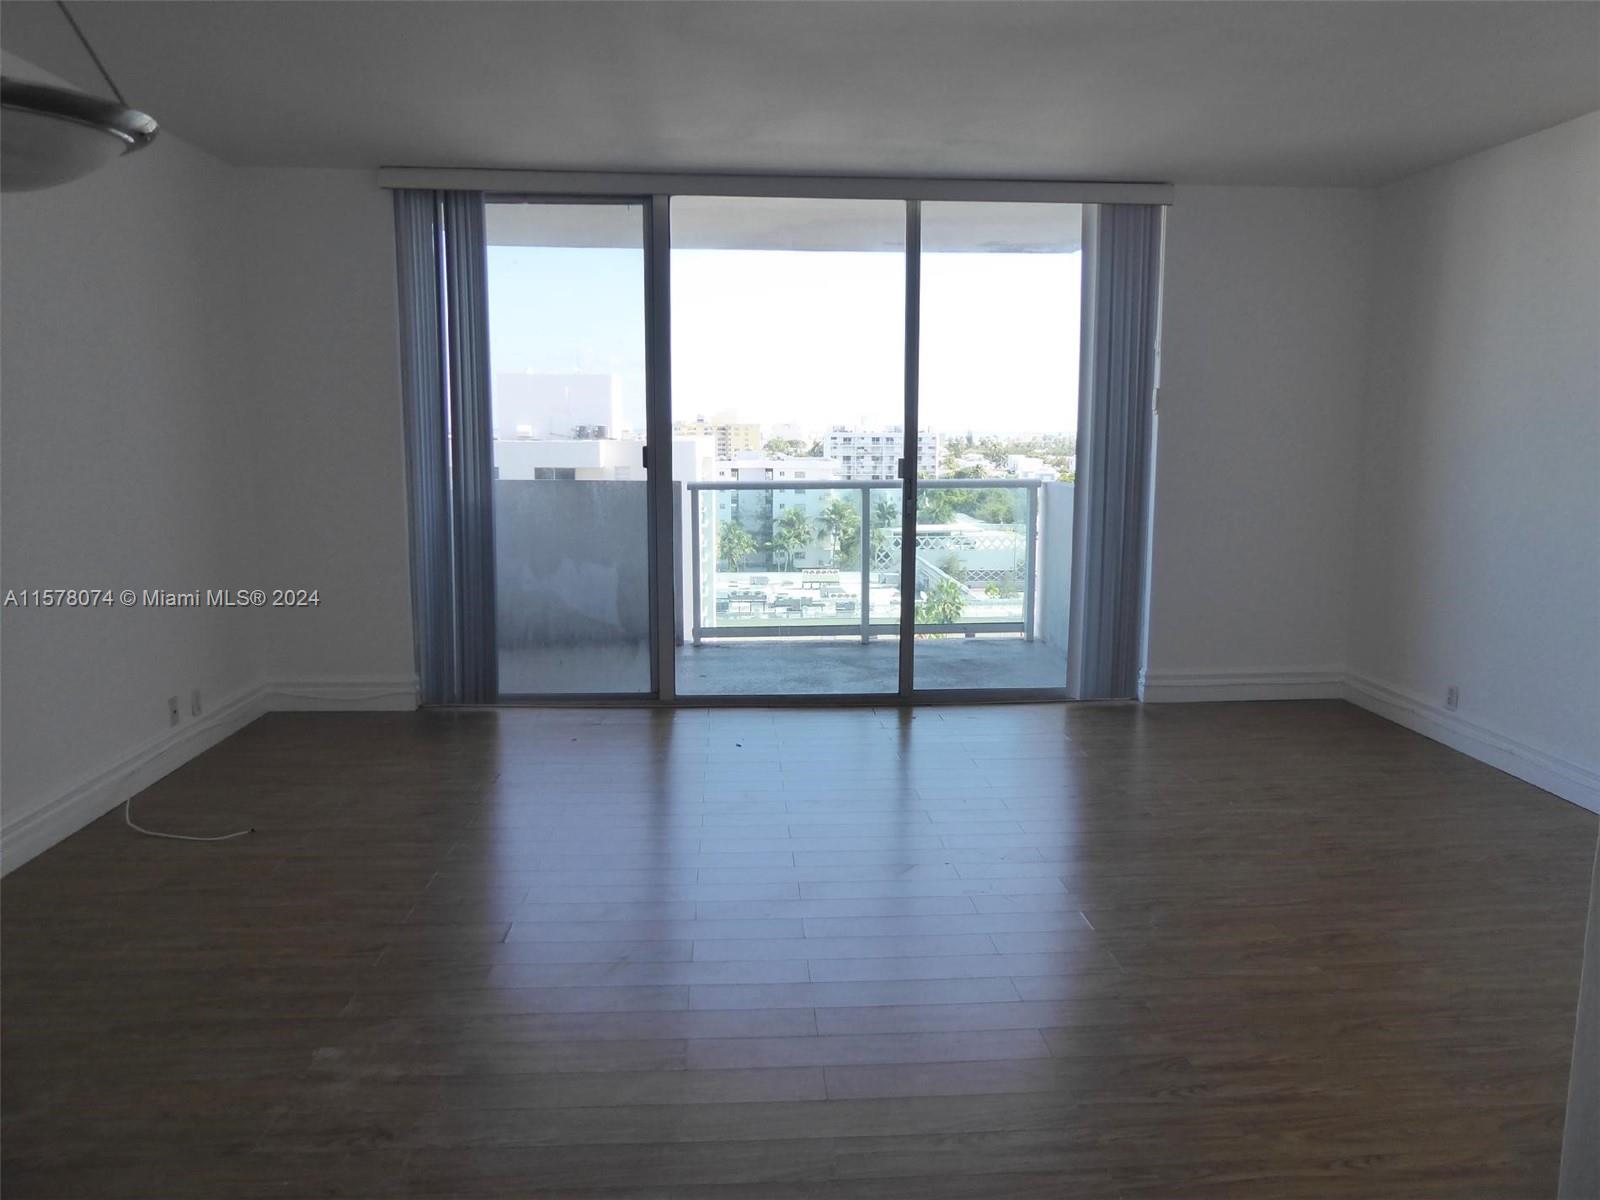 Spacious studio with an open view of the city of Miami Beach. Unit has lots of closet space and a private balcony. Full service building!! Amenities include bay front pool, state of the art gym, valet, 24/7 concierge, mini market and more!! Valet parking available at $85 per month. Cable & internet included in maintenance fee.